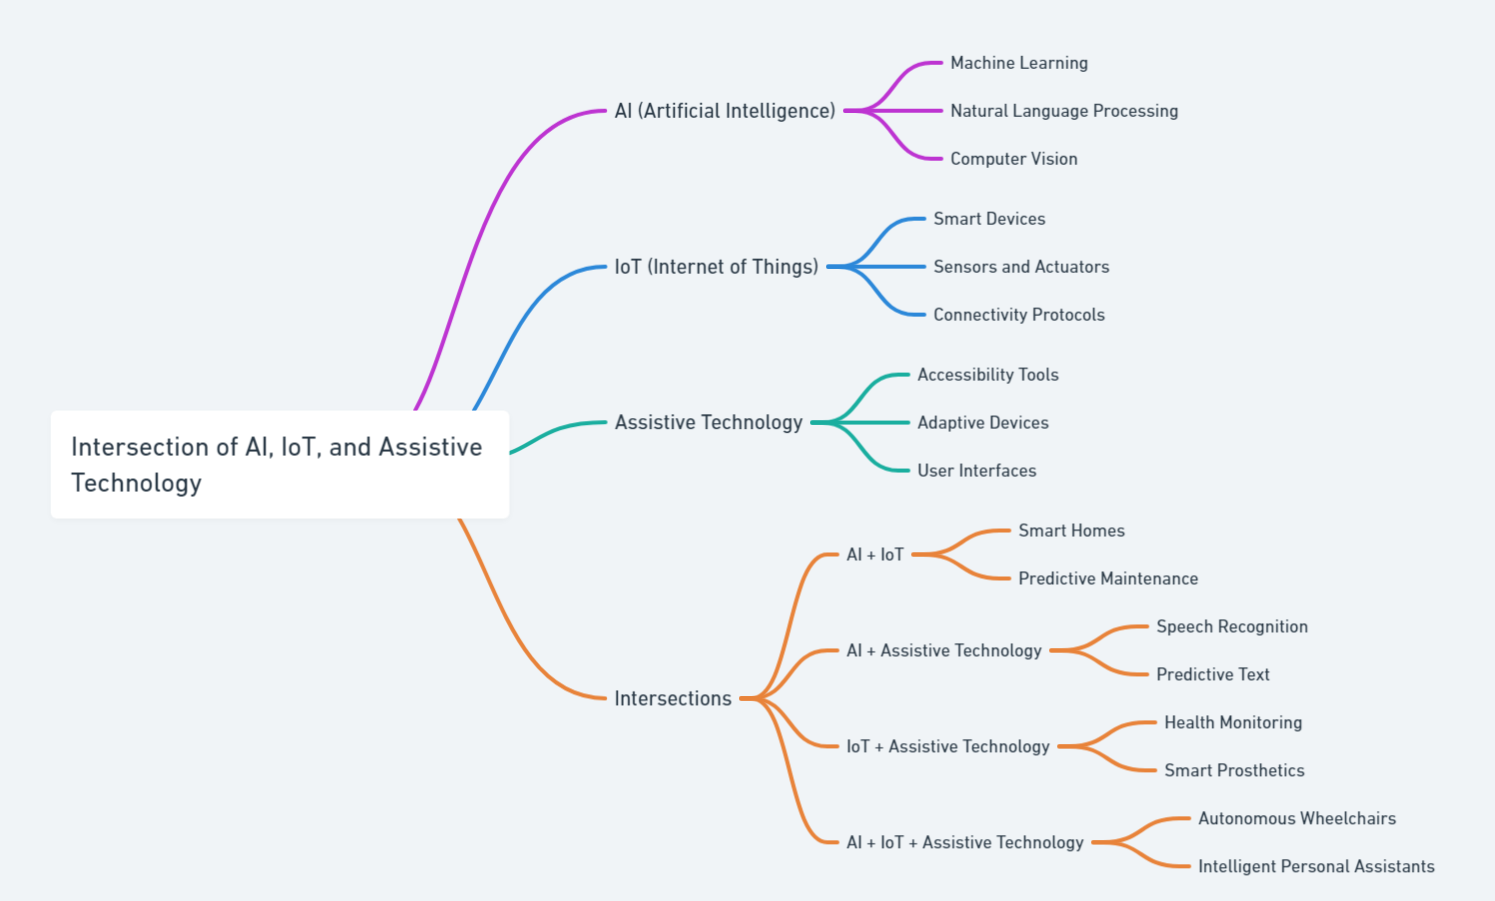 Intersection of AI, IoT, and Assistive Technology